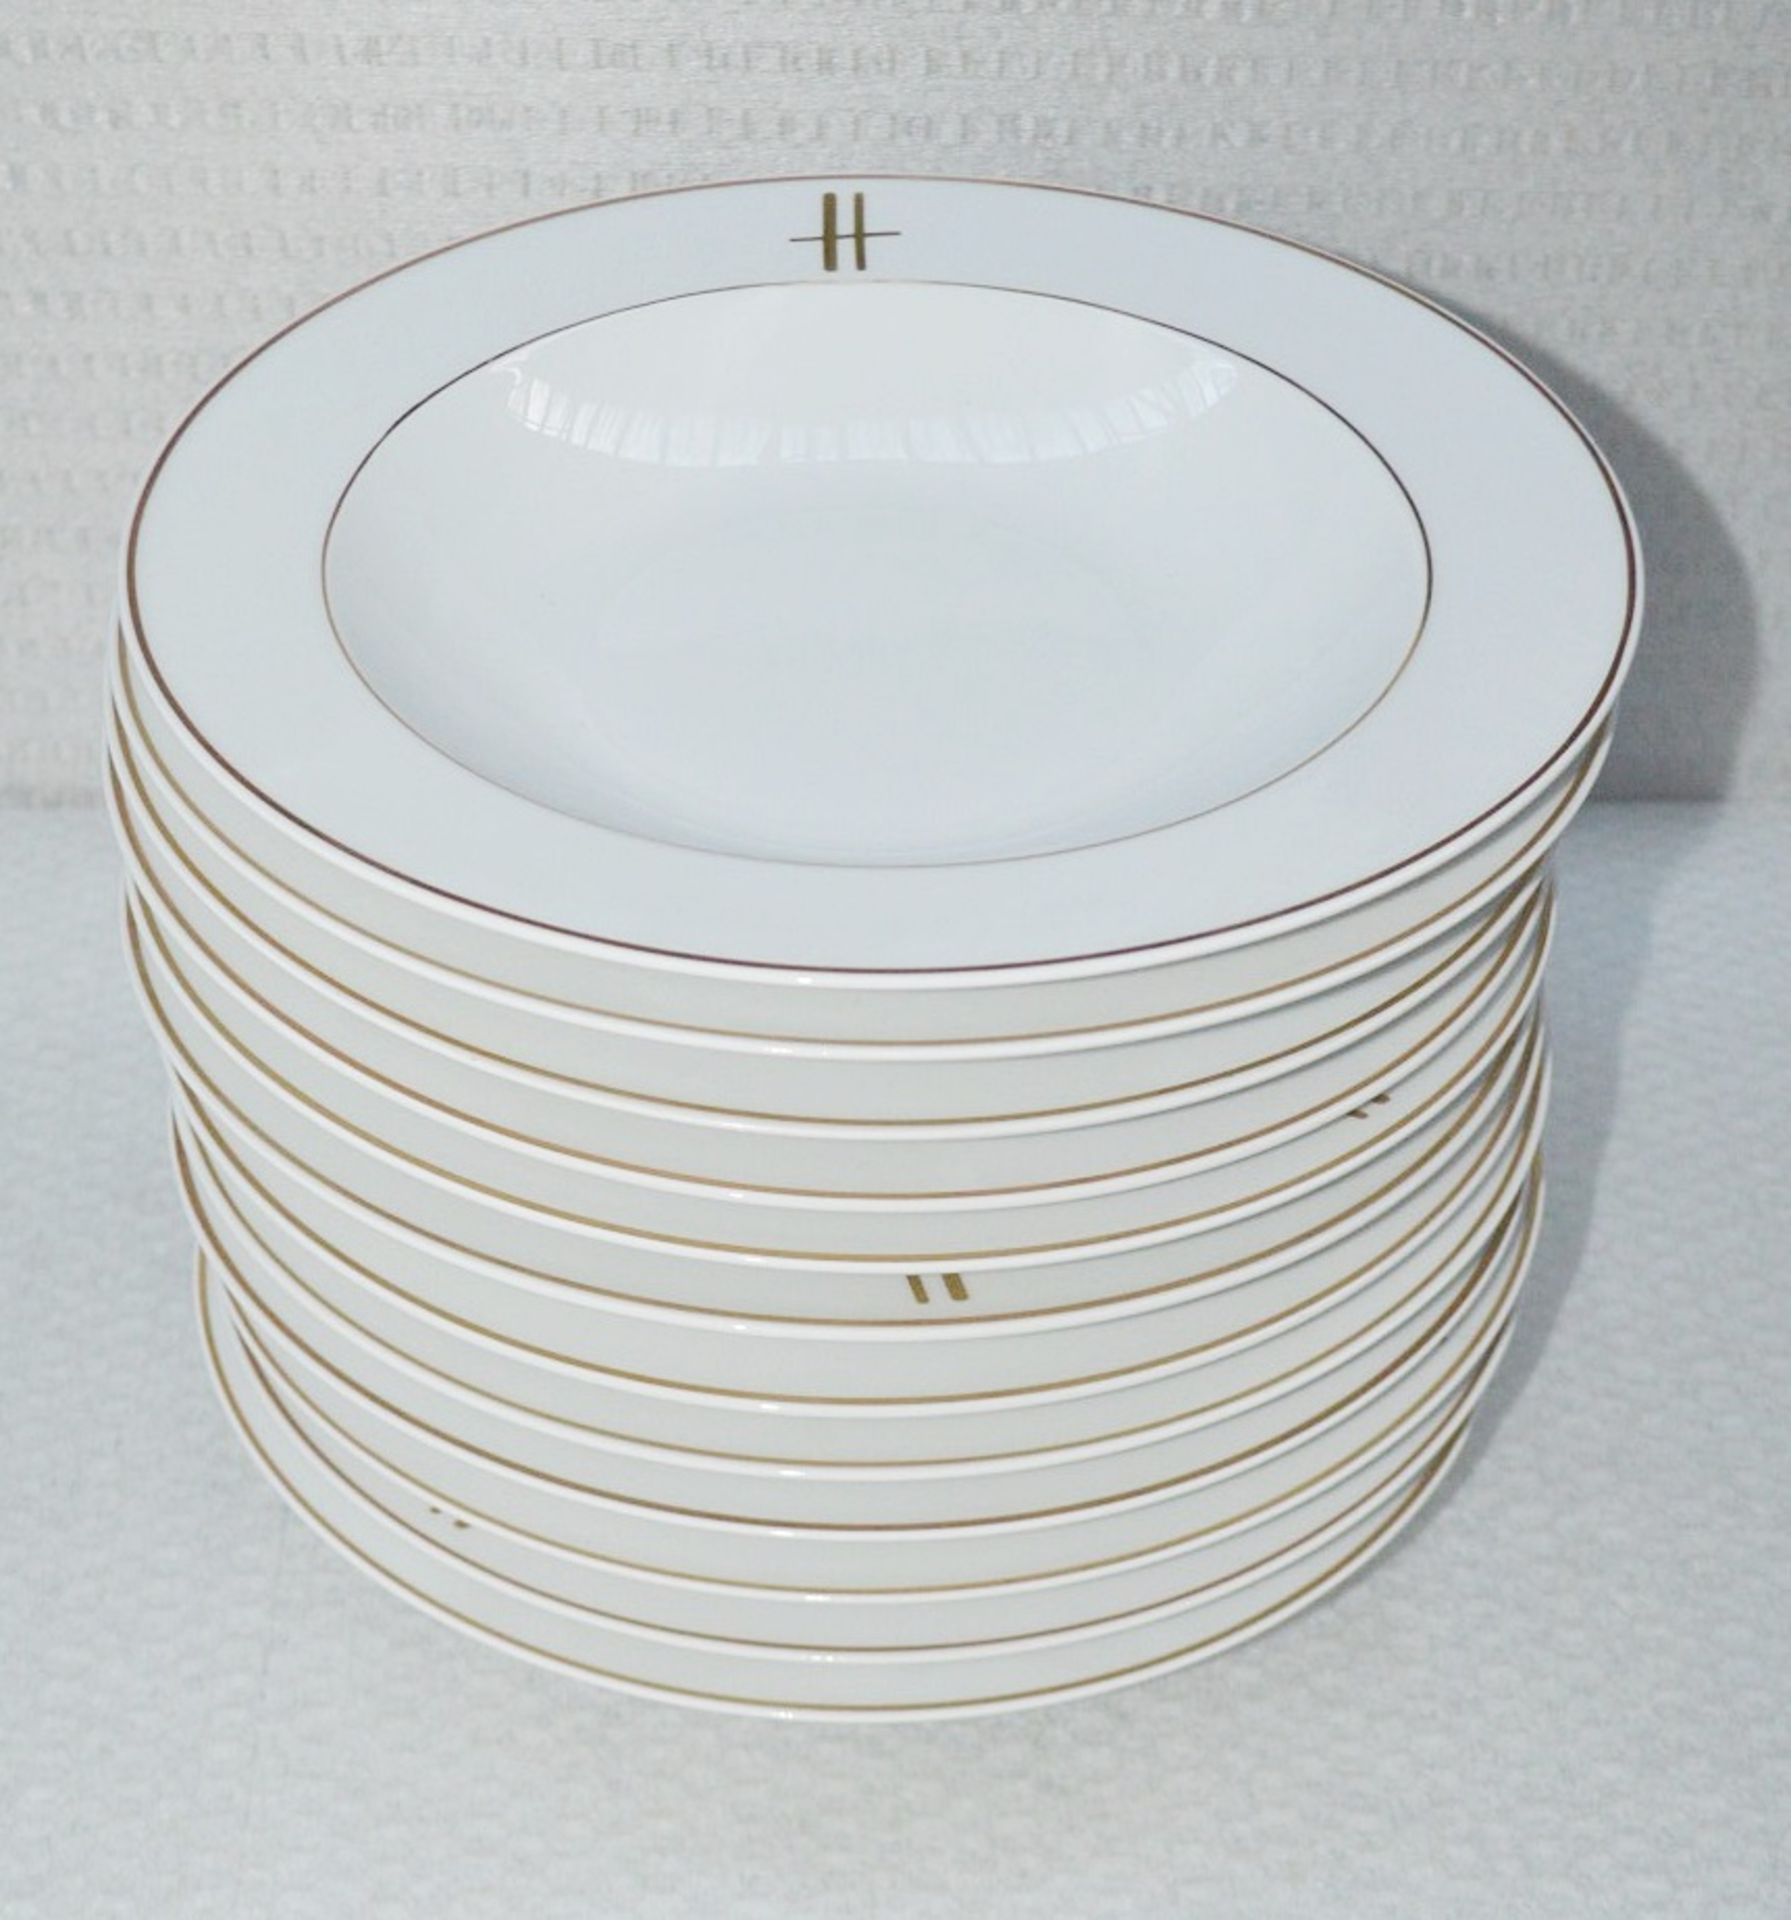 20 x PILLIVUYT Porcelain Pasta / Soup Plates In White Featuring 'Famous Branding' In Gold -